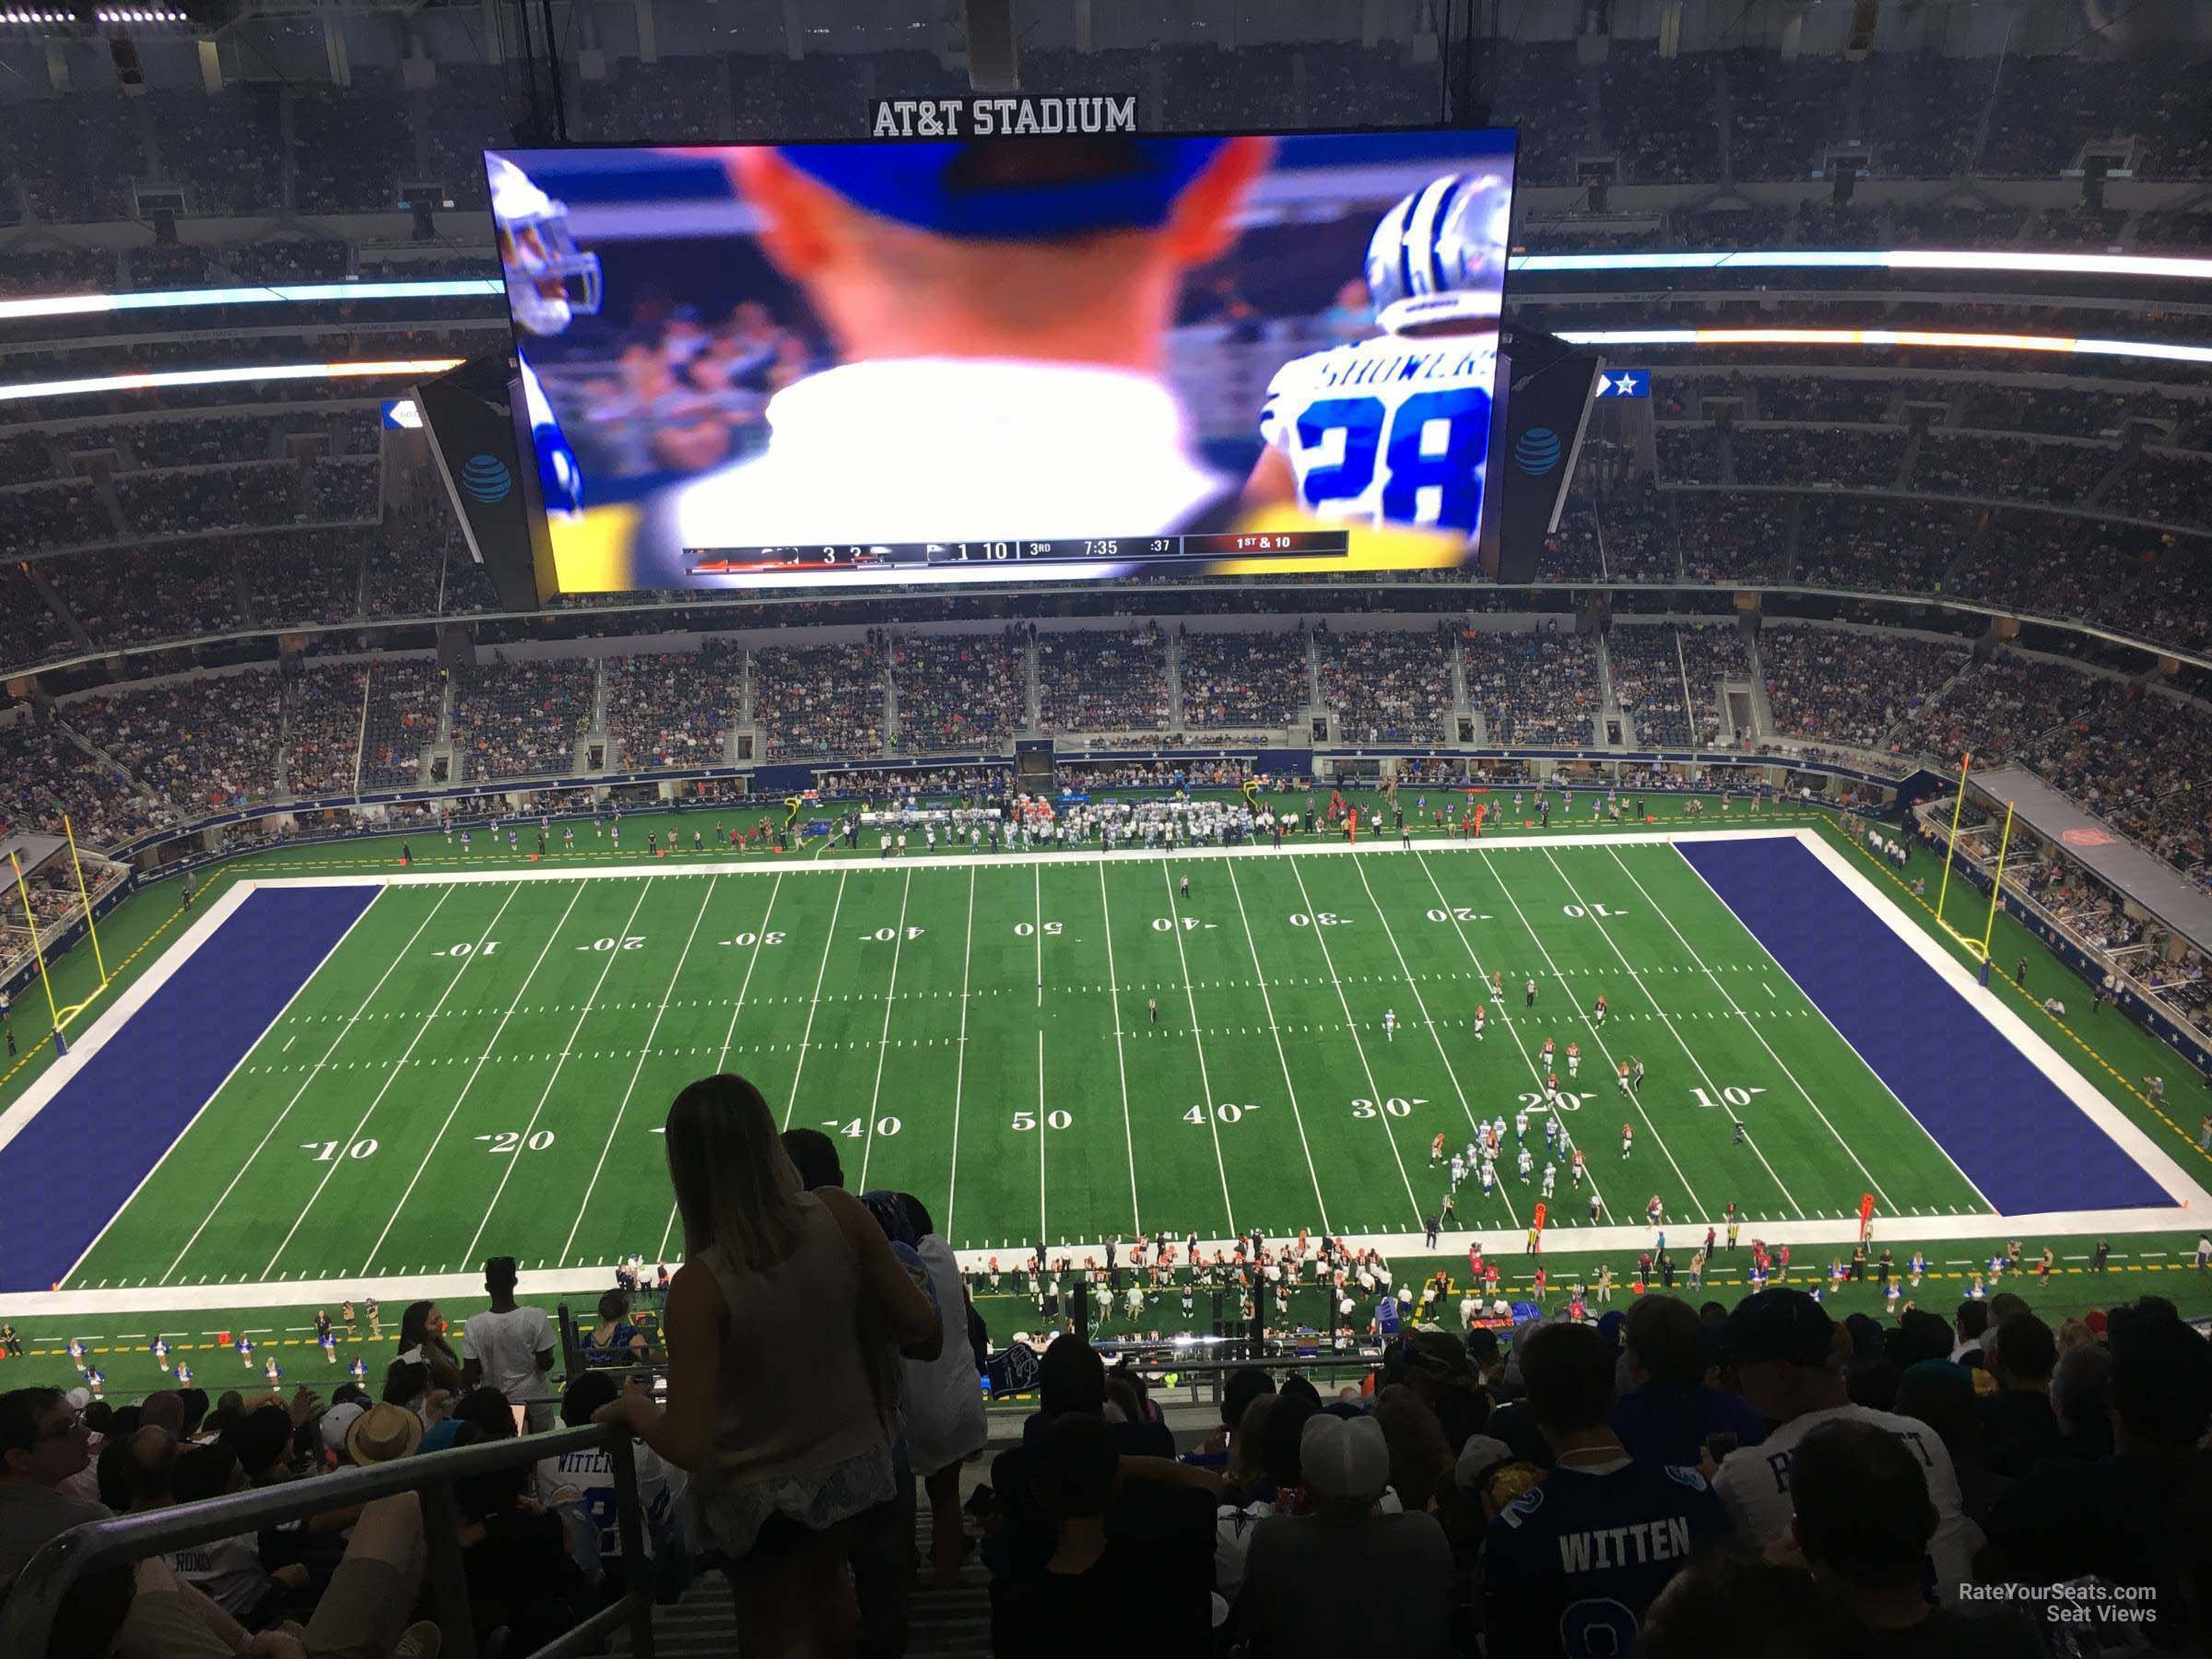 section 445, row 22 seat view  for football - at&t stadium (cowboys stadium)